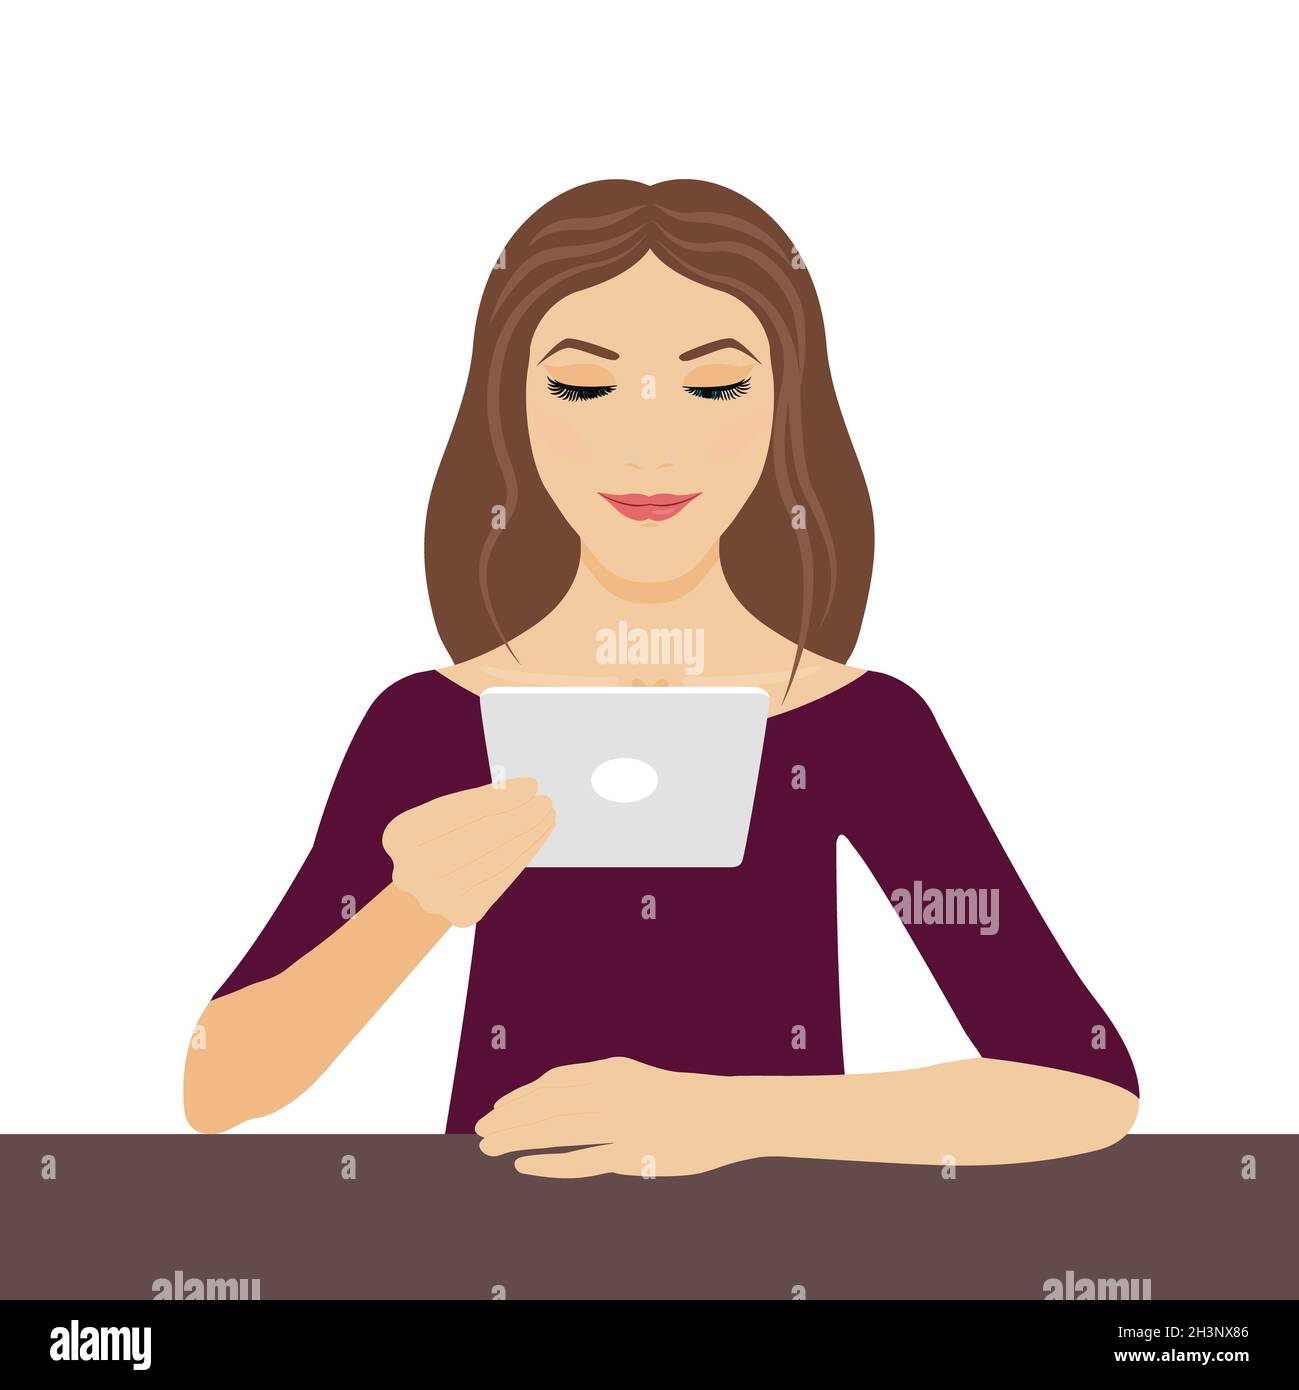 Woman looking at a tablet, illustration Stock Photo